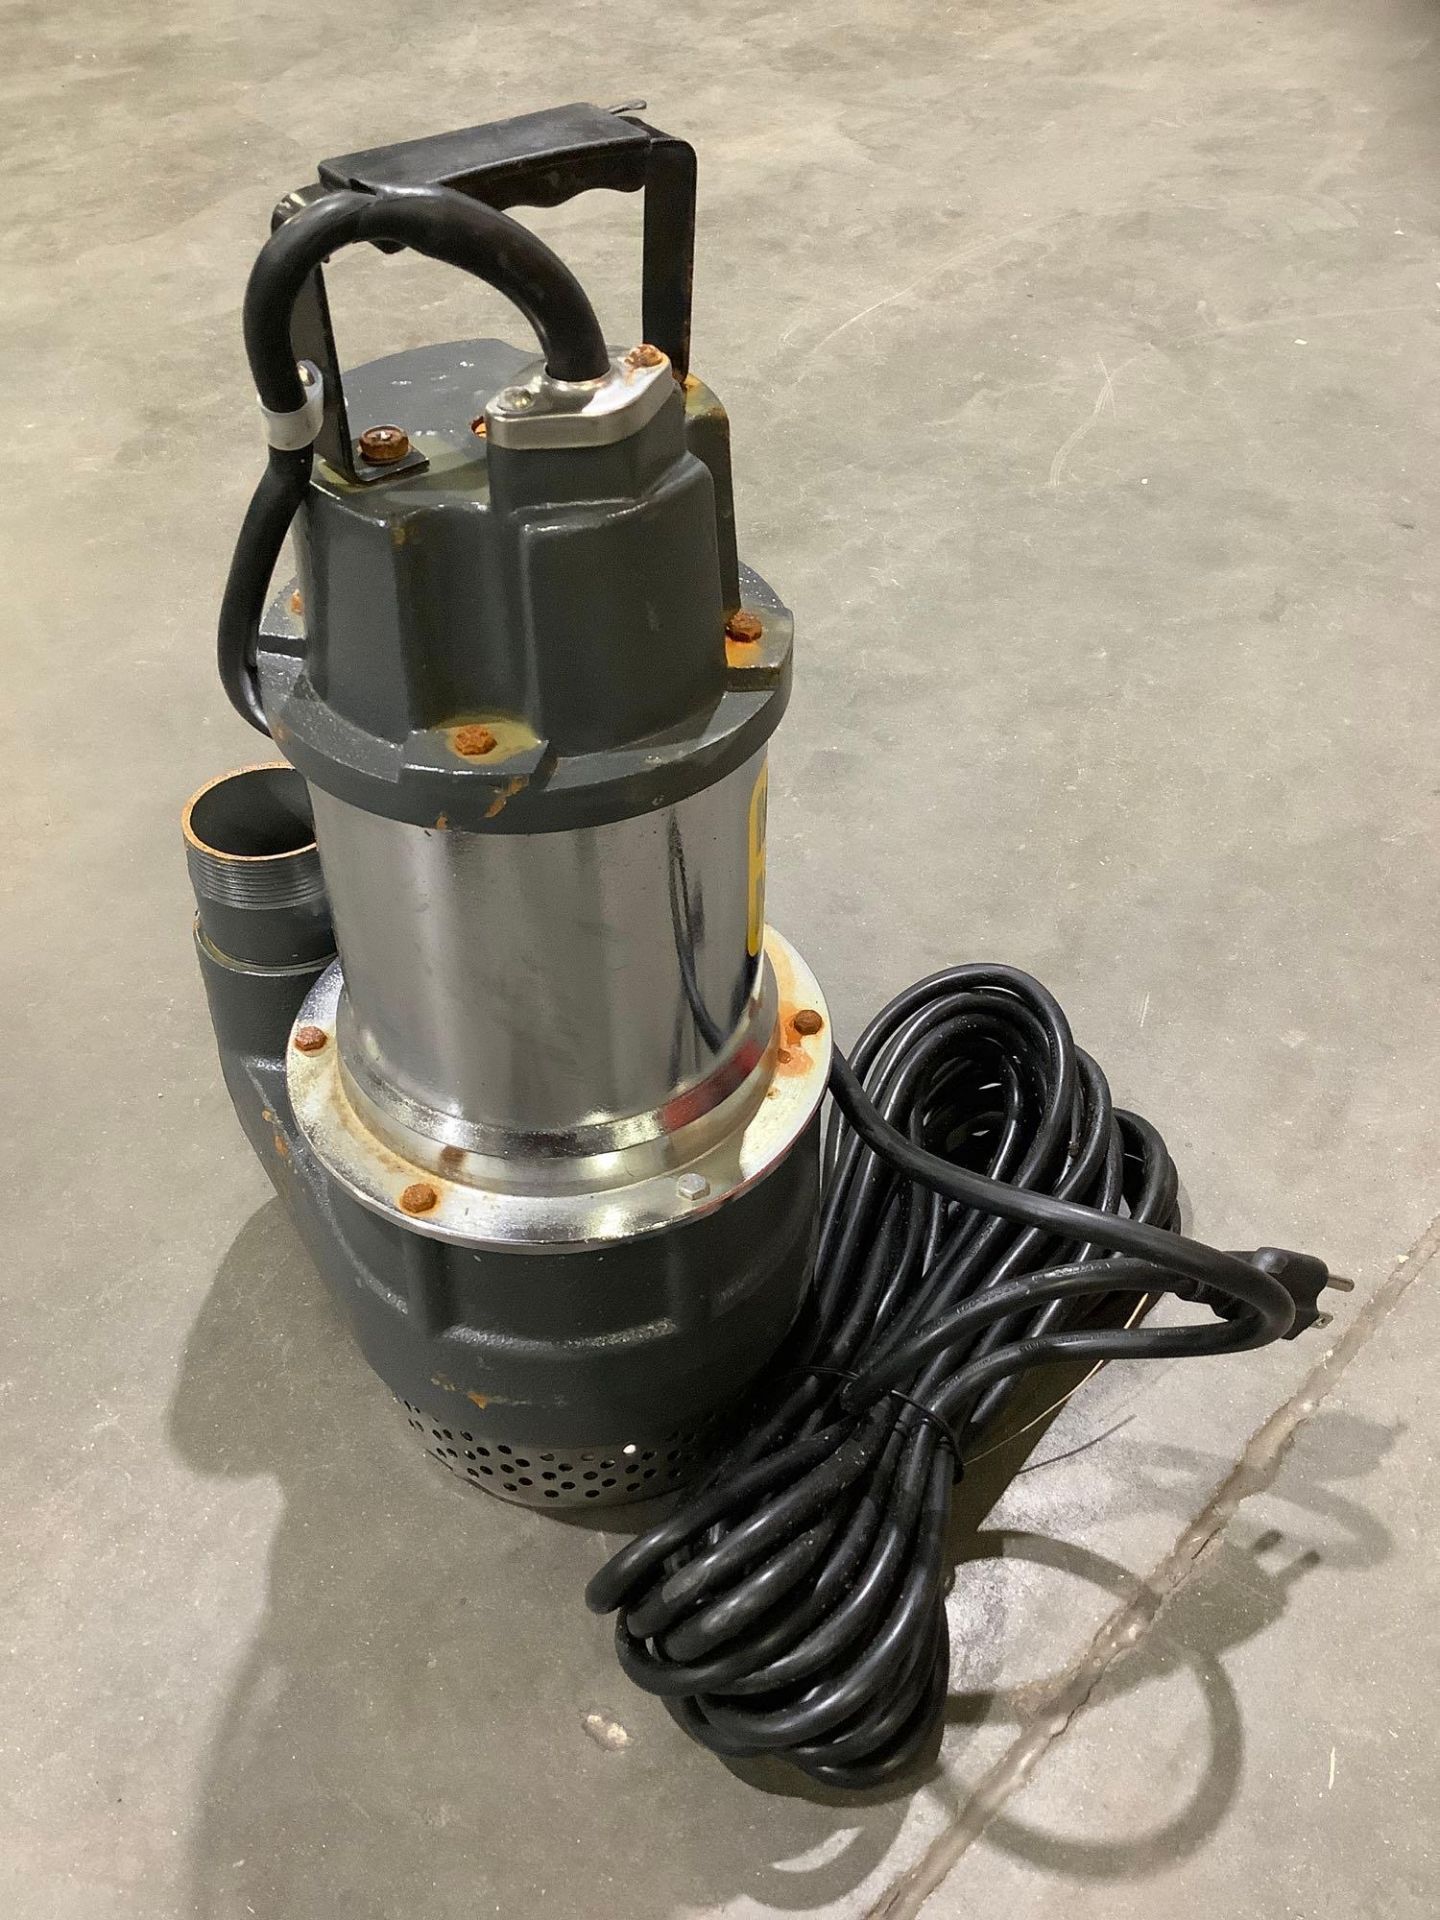 UNUSED SUBMERSIBLE MUSTANG MP4800 PUMP - Image 4 of 6